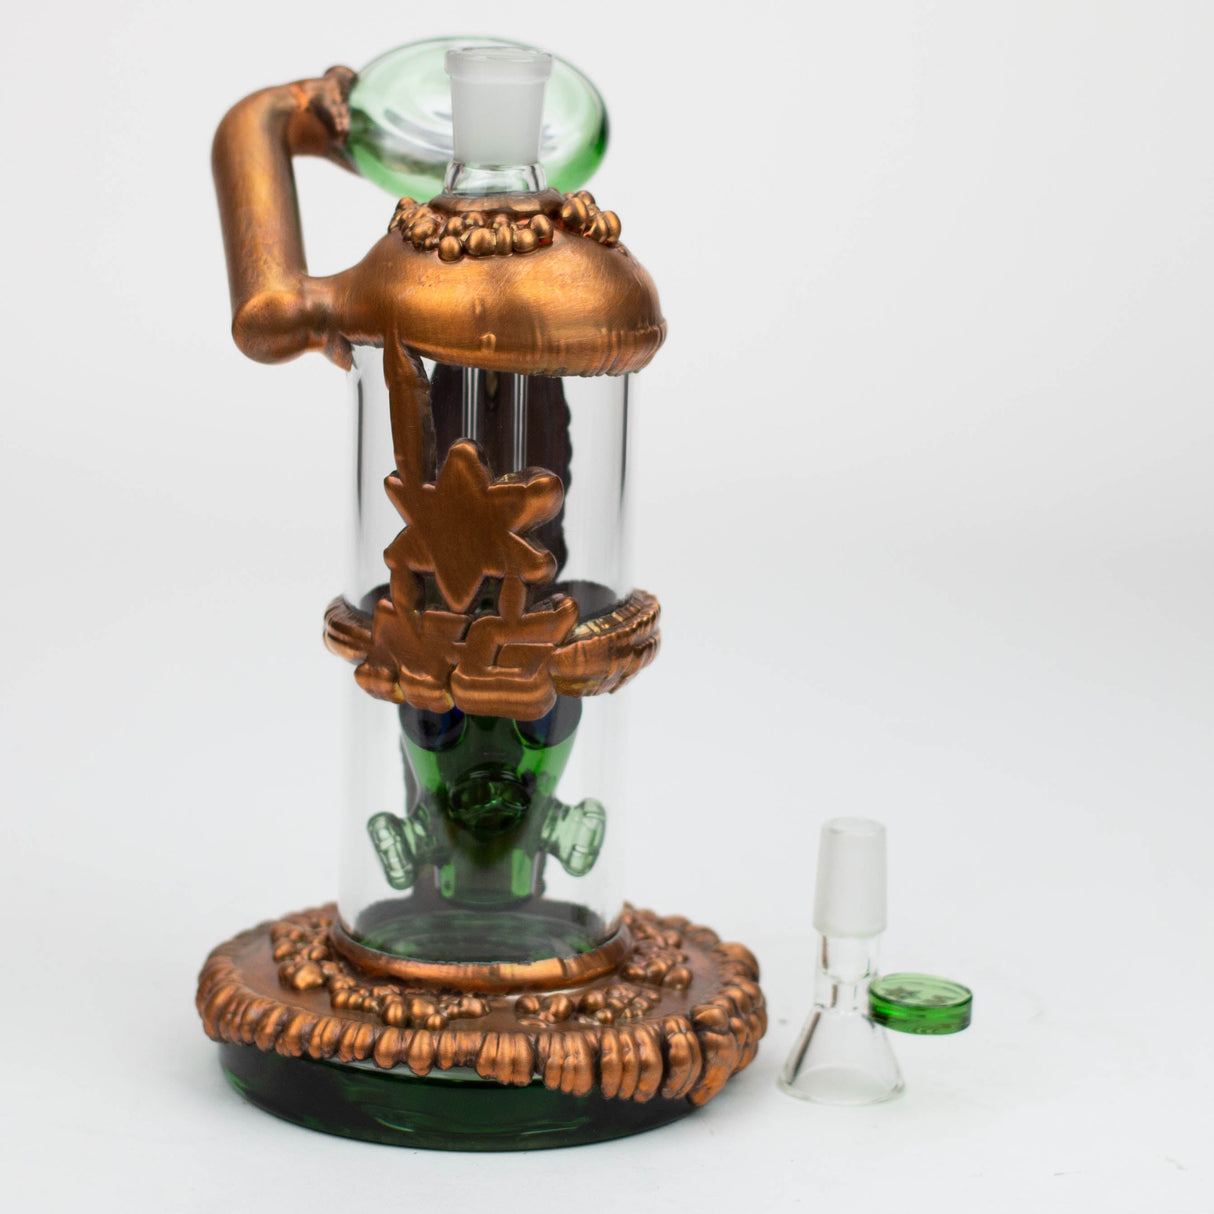 NG-9 inch Copper Plated Gas Mask Bubbler [N8034]